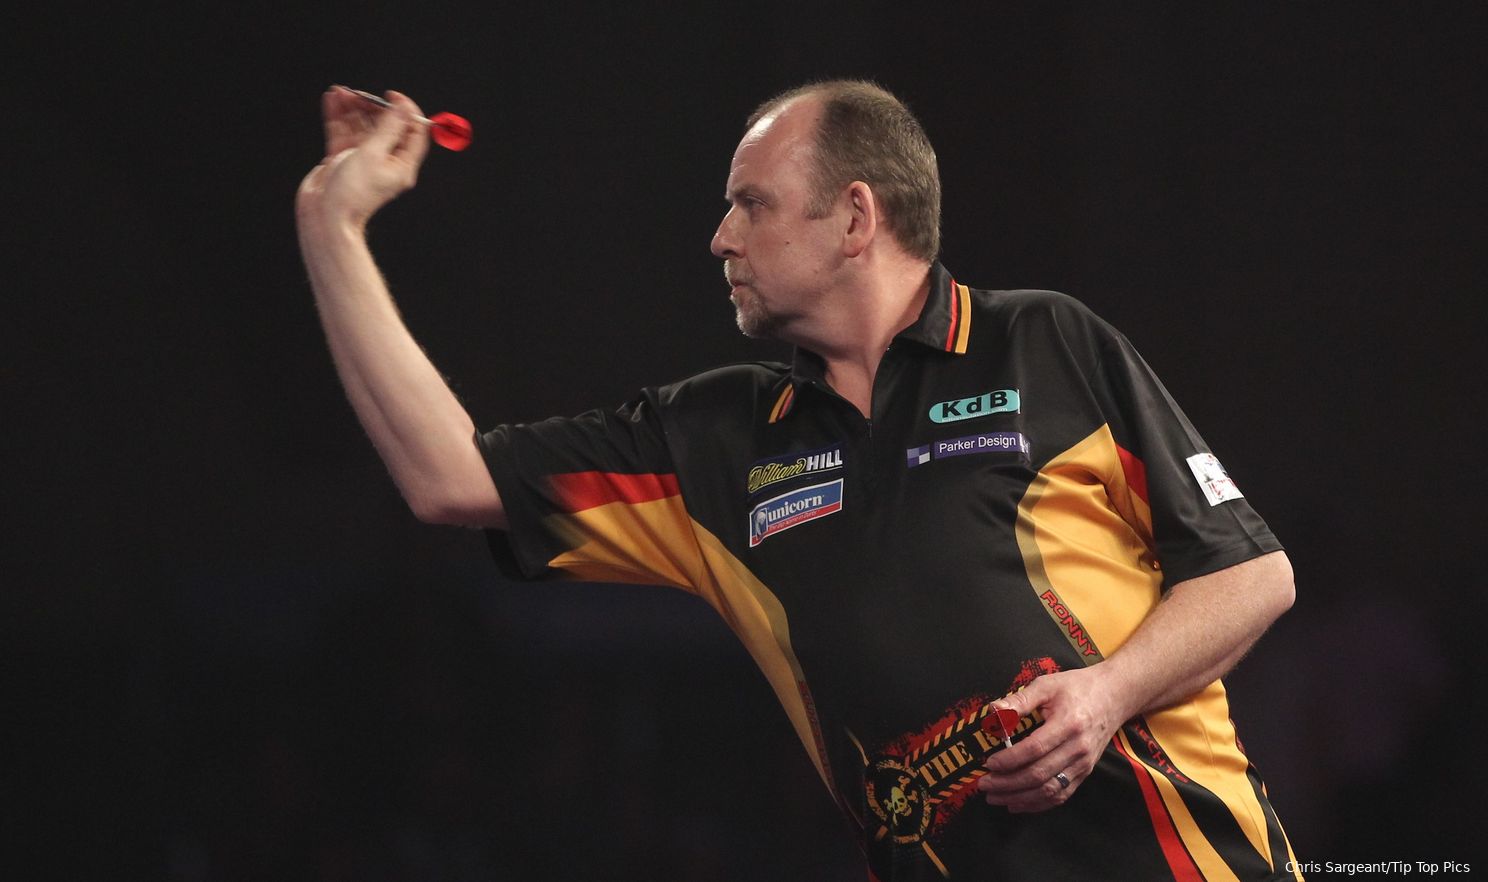 Who are the ten oldest players with a PDC Tour Card?